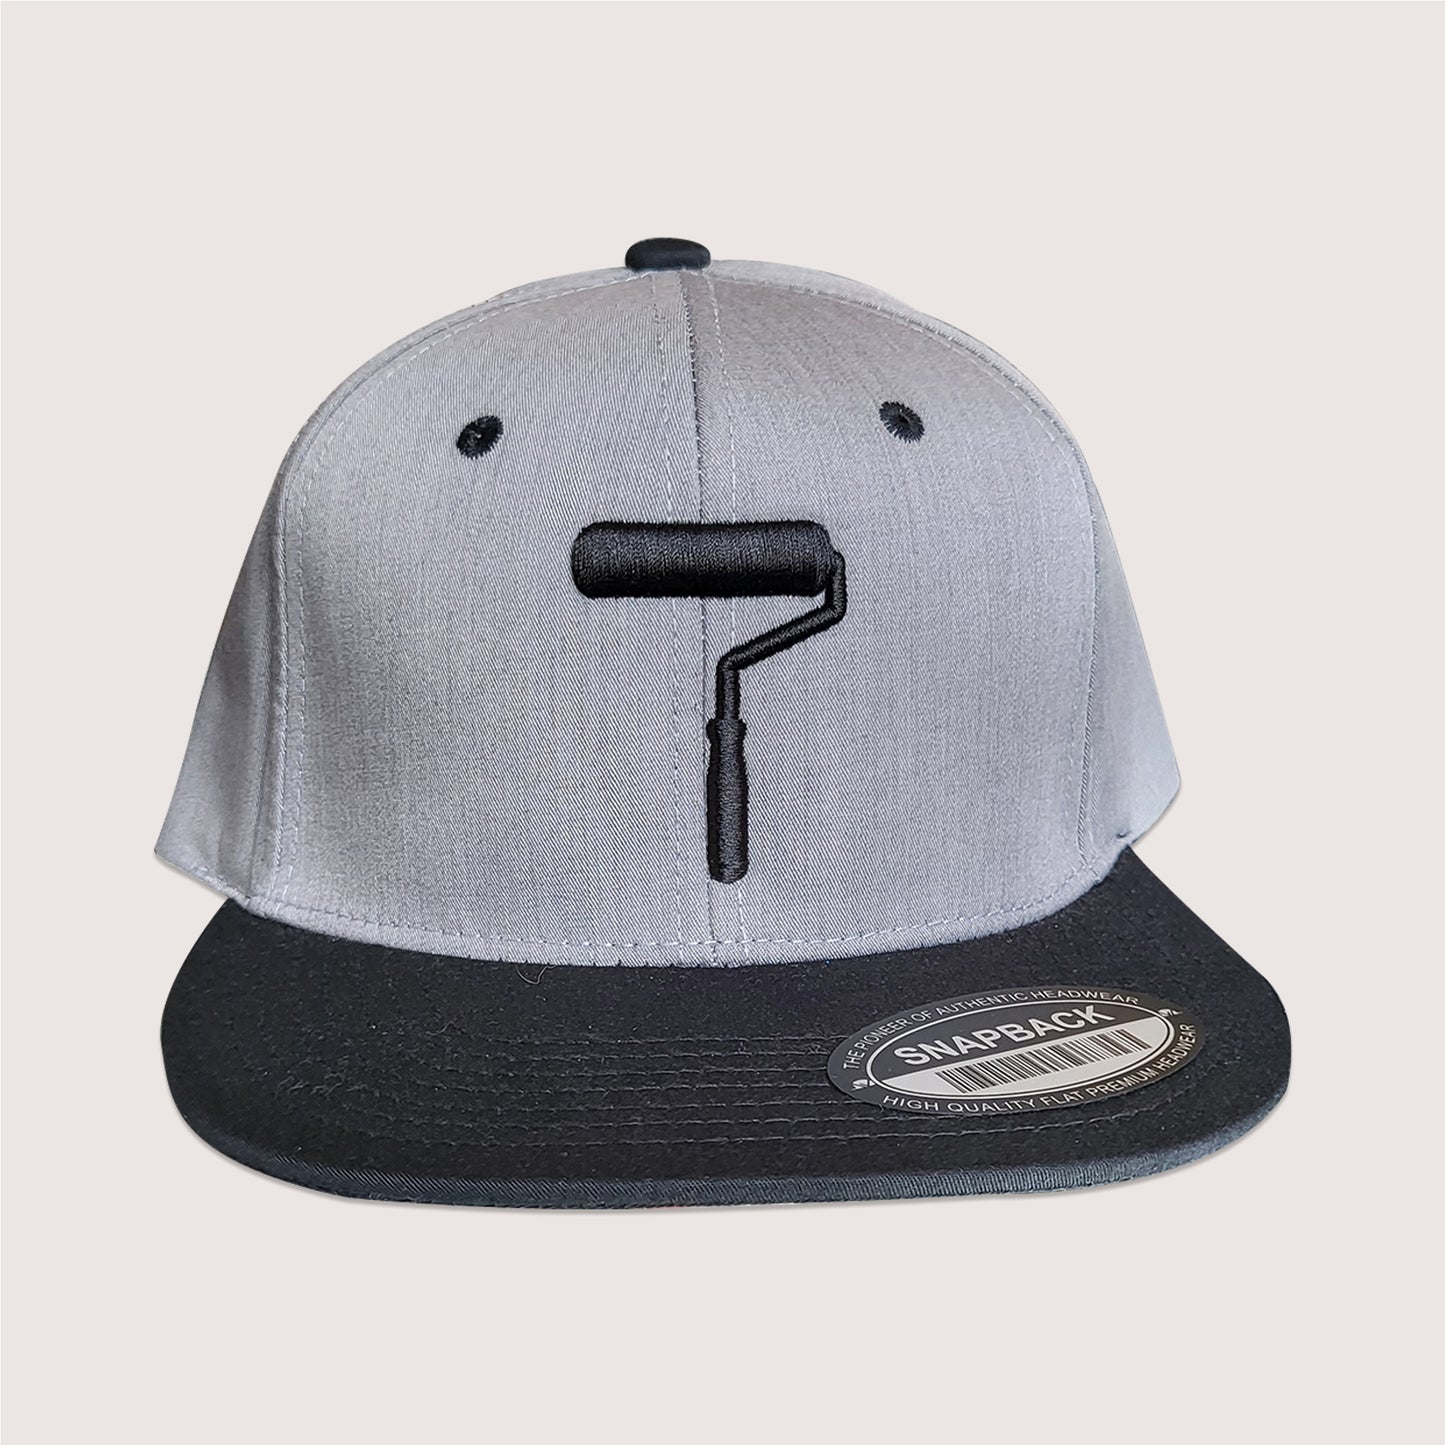 Phatcaps graffiti brand grey baseball cap paint roller with black embroidery.